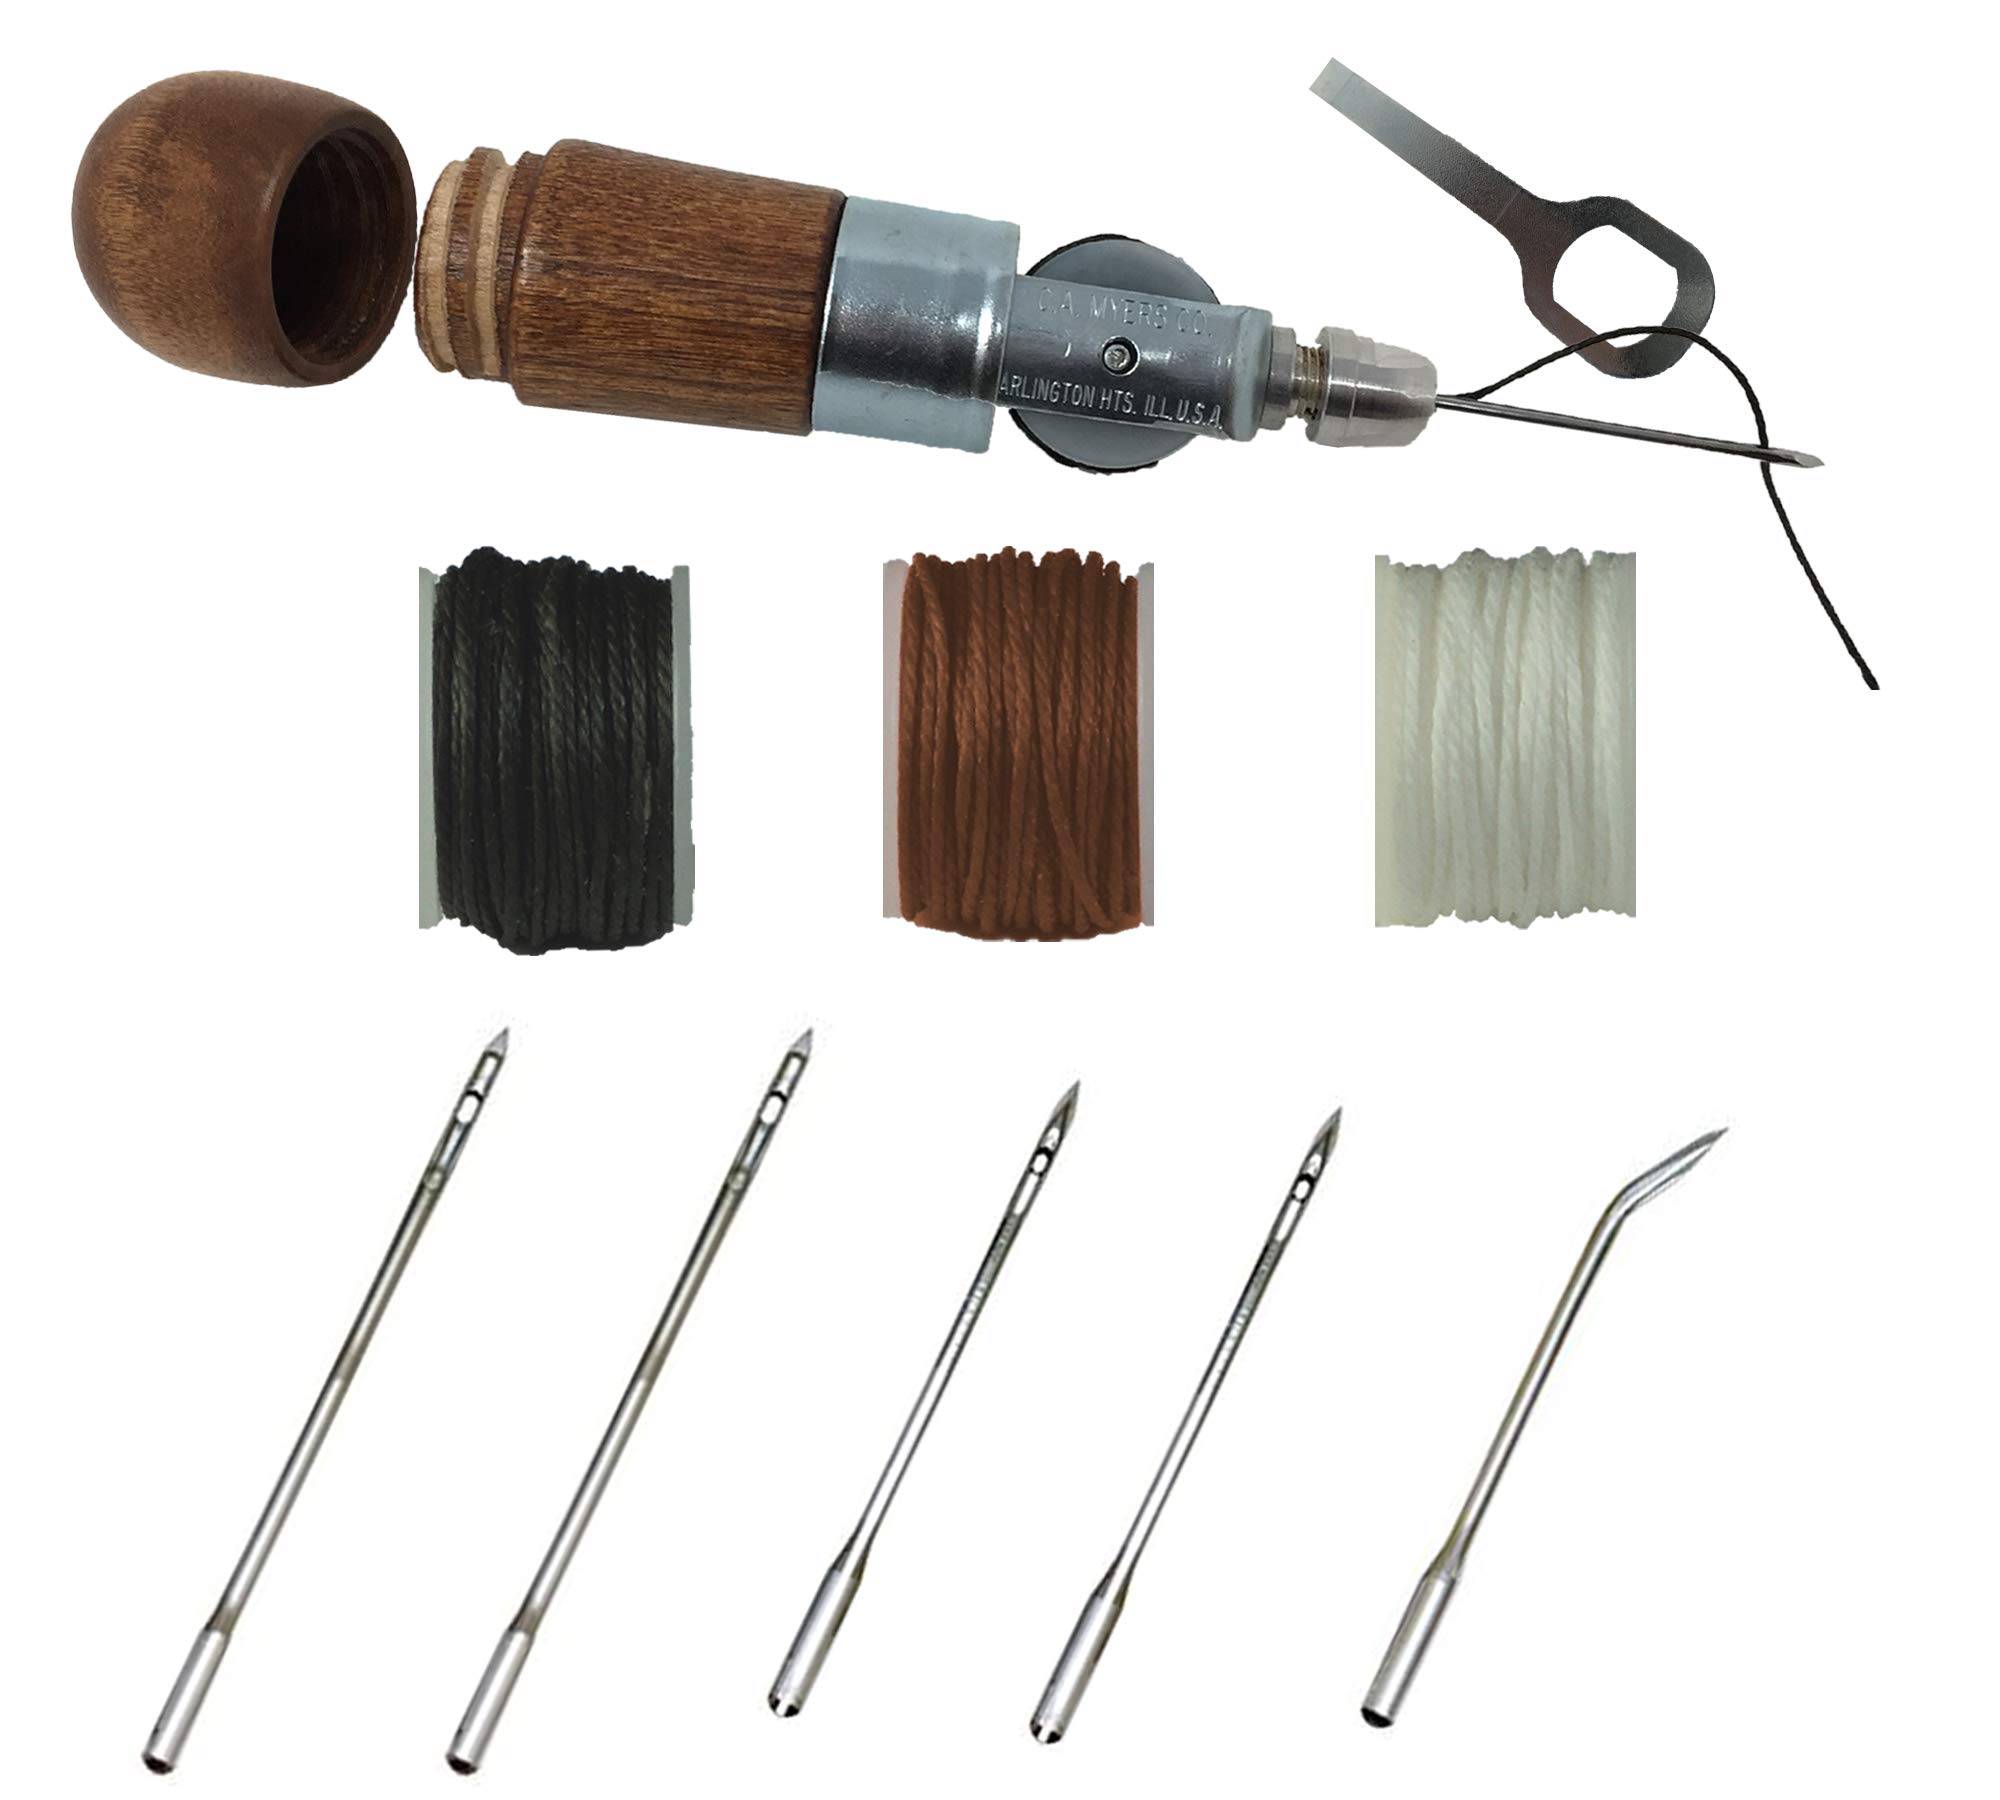 Awl for All - CA Meyers Professional Leathercraft Accessories, Sewing, Stitching Awl Tool Kit & Supplies, HEAVY DUTY - MADE in USA - DIY Craft, Leather,